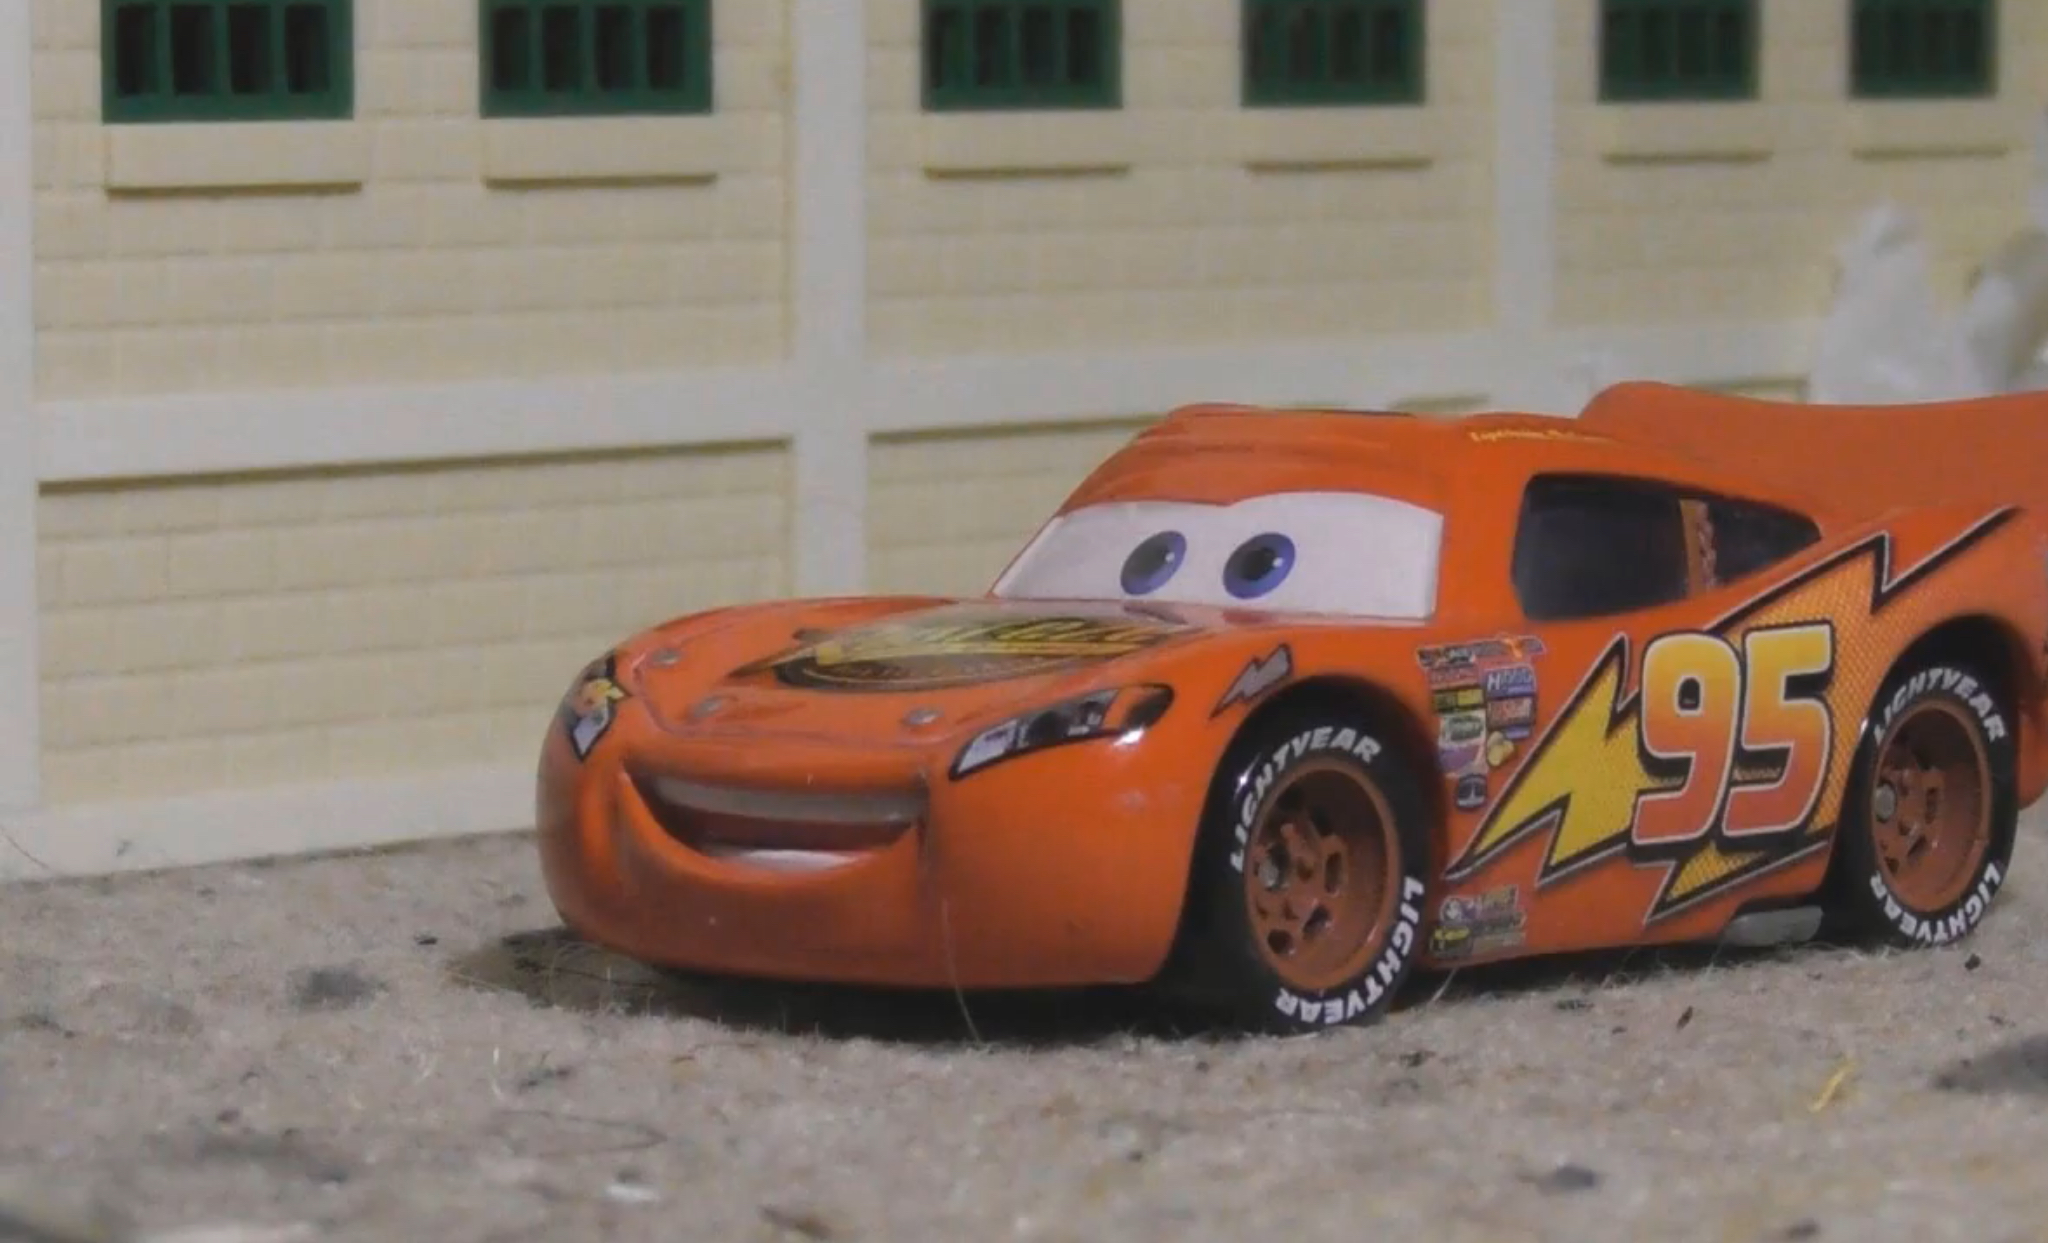 Lightning McQueen's Crash is Front & Center of Cars Official Trailer - The  Credits